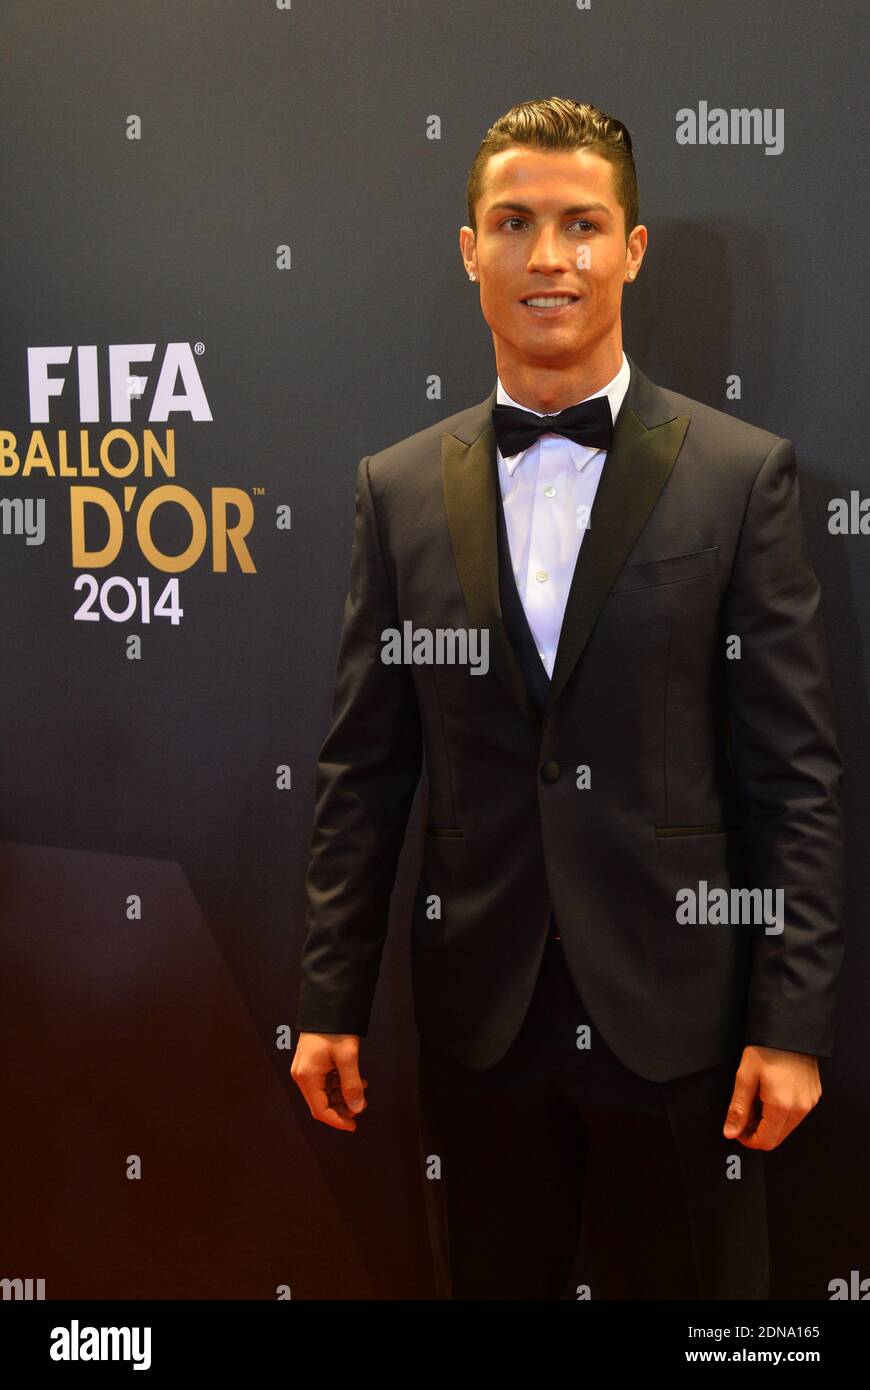 Portugal's Cristiano Ronaldo arriving at the FIFA Ballon d'Or 2014 trophy  at the Kongresshalle in Zurich, Switzerland on January 12, 2015. Photo by  Christian Liewig/ABACAPRESS.COM Stock Photo - Alamy